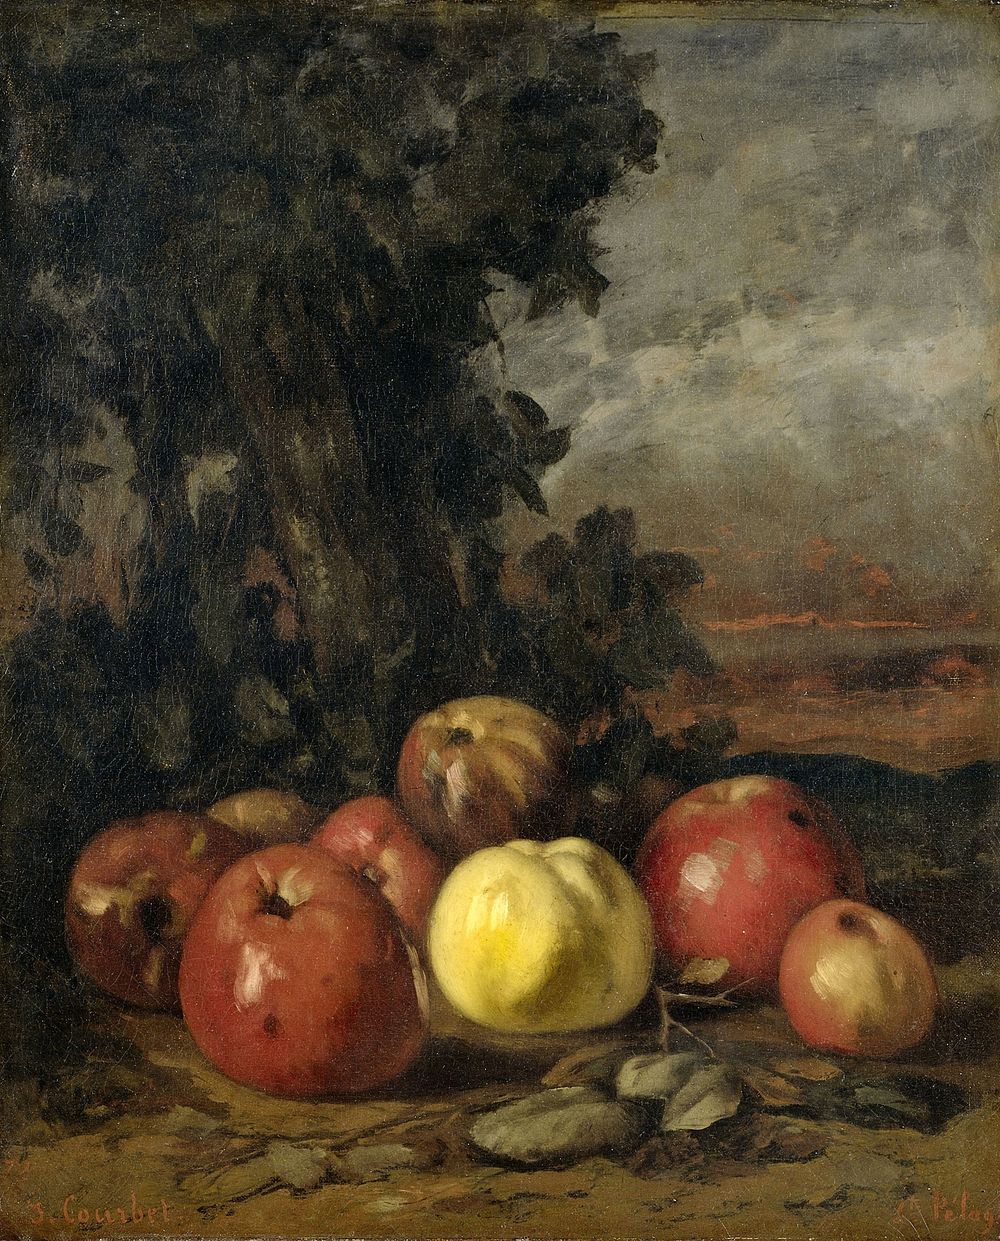 Still Life with Apples (1871 - 1872) by Gustave Courbet